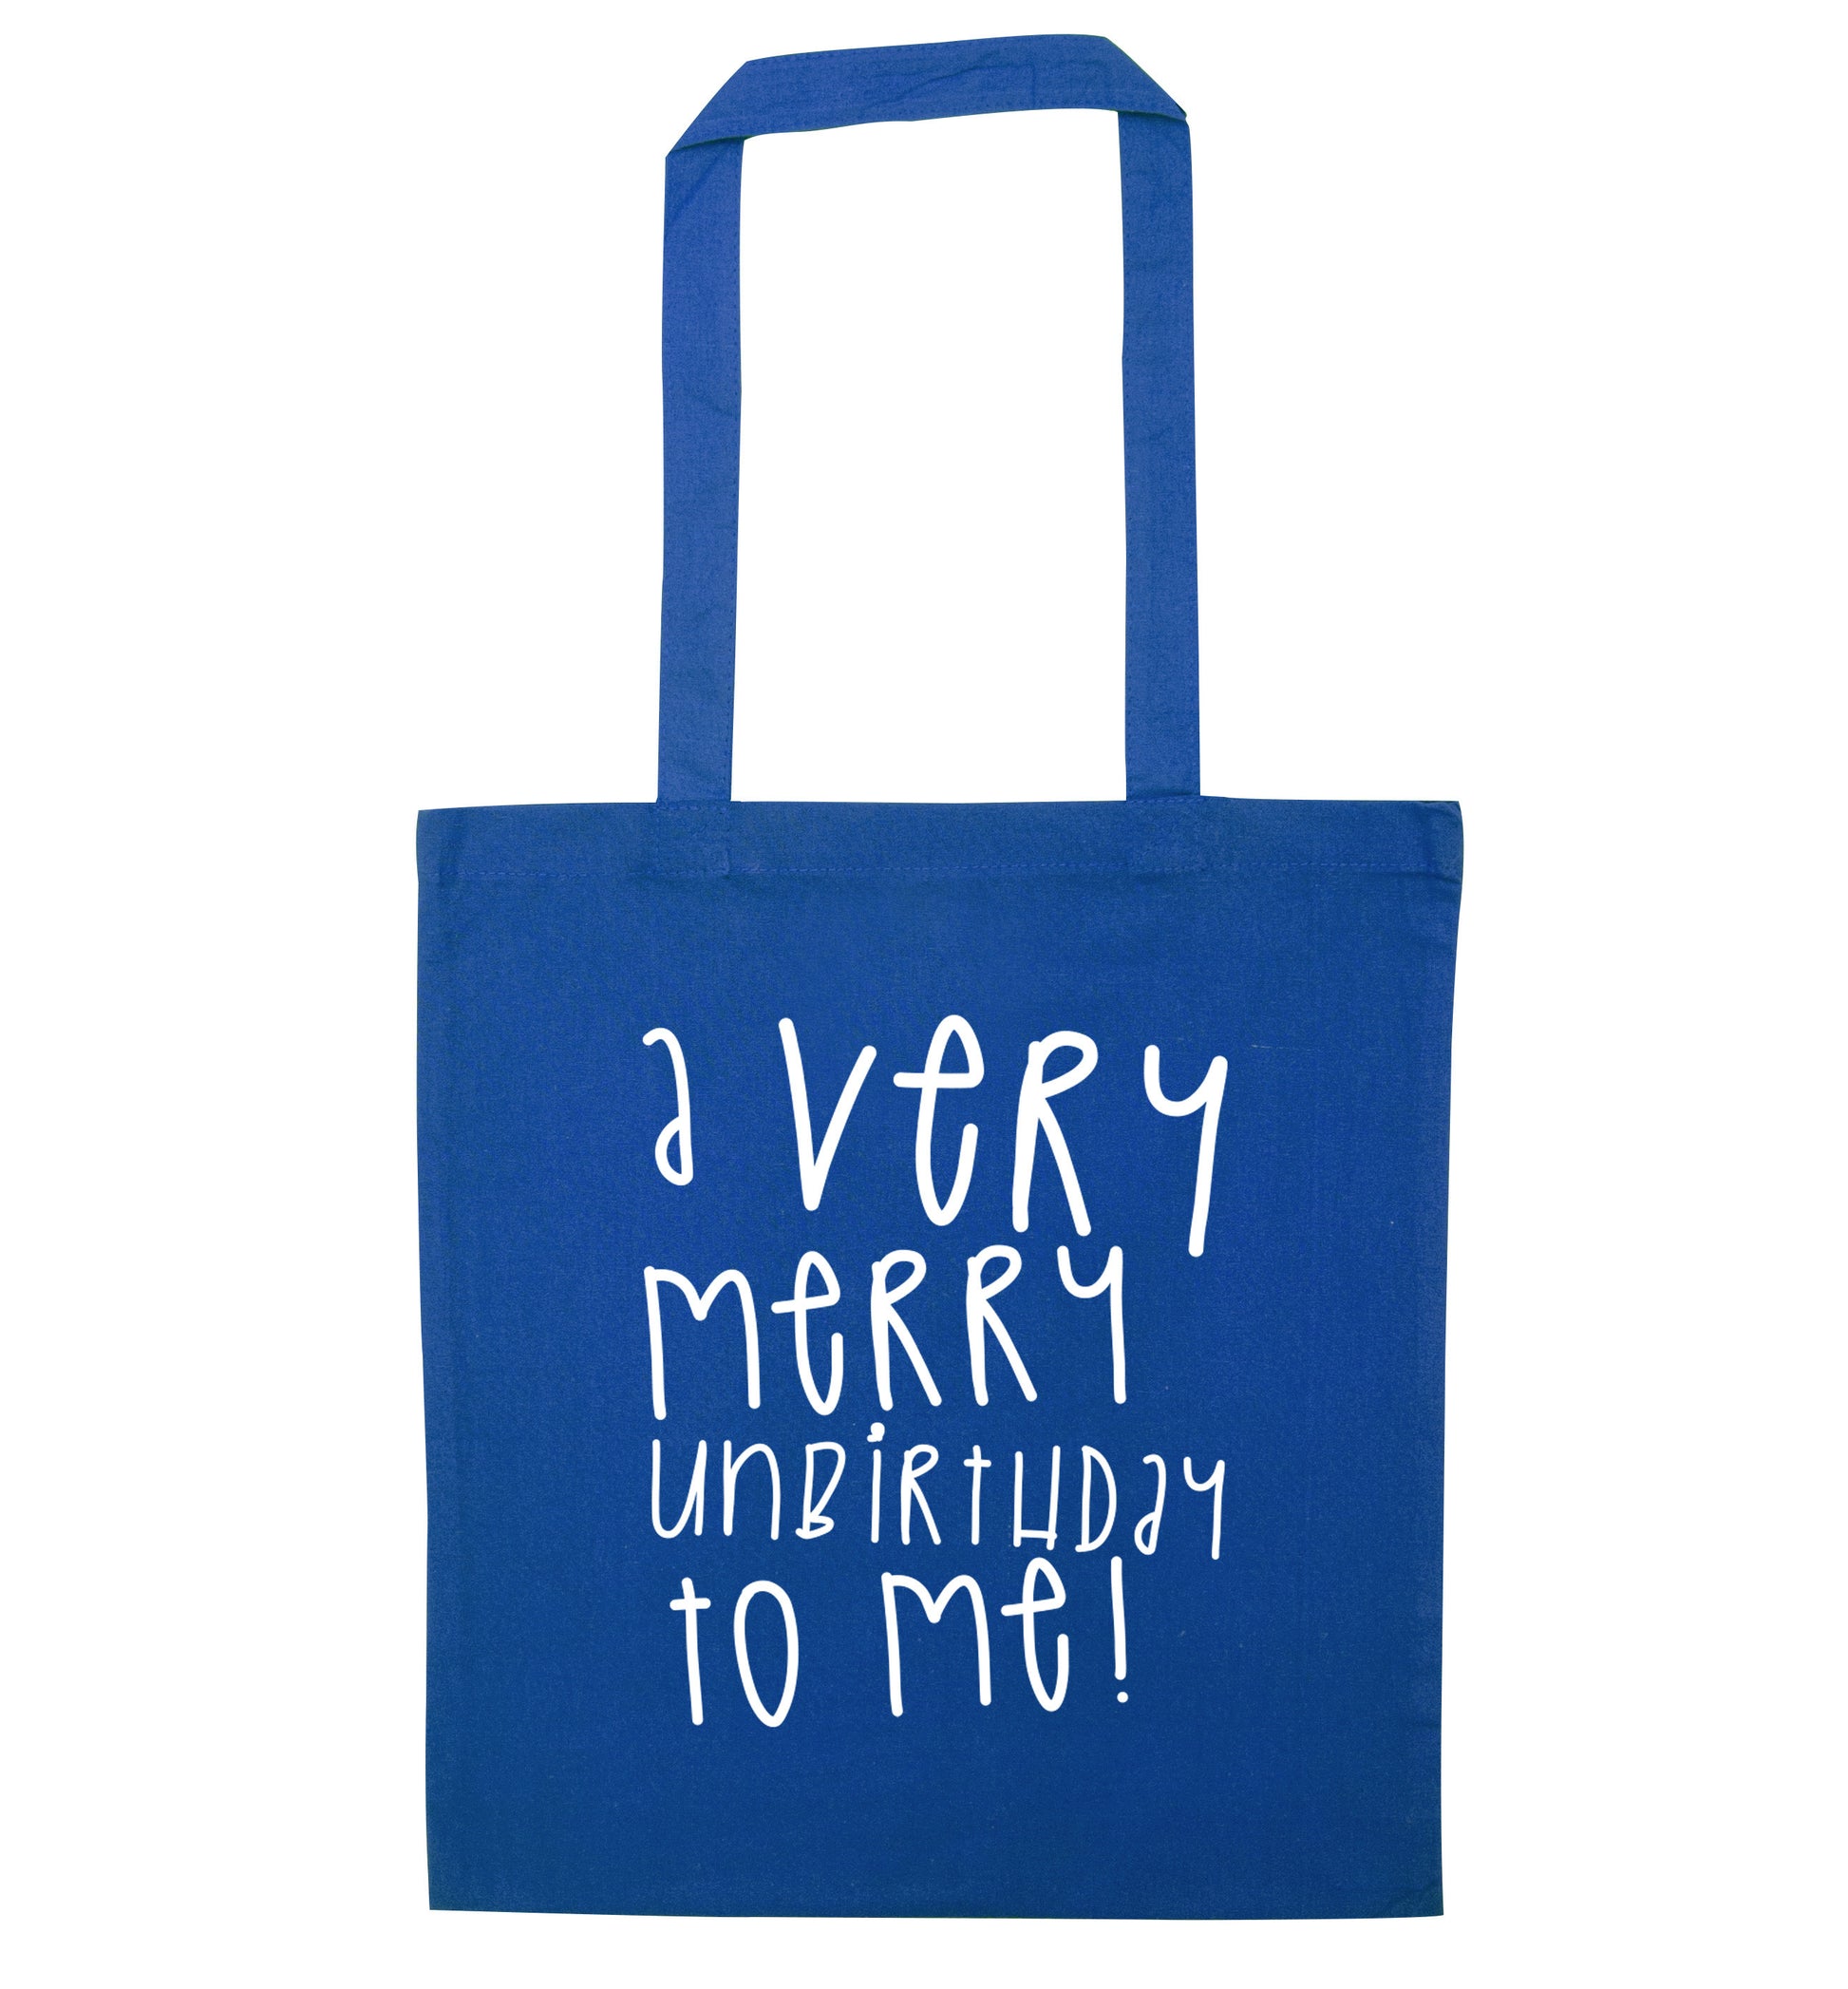 A very merry unbirthday to me! blue tote bag